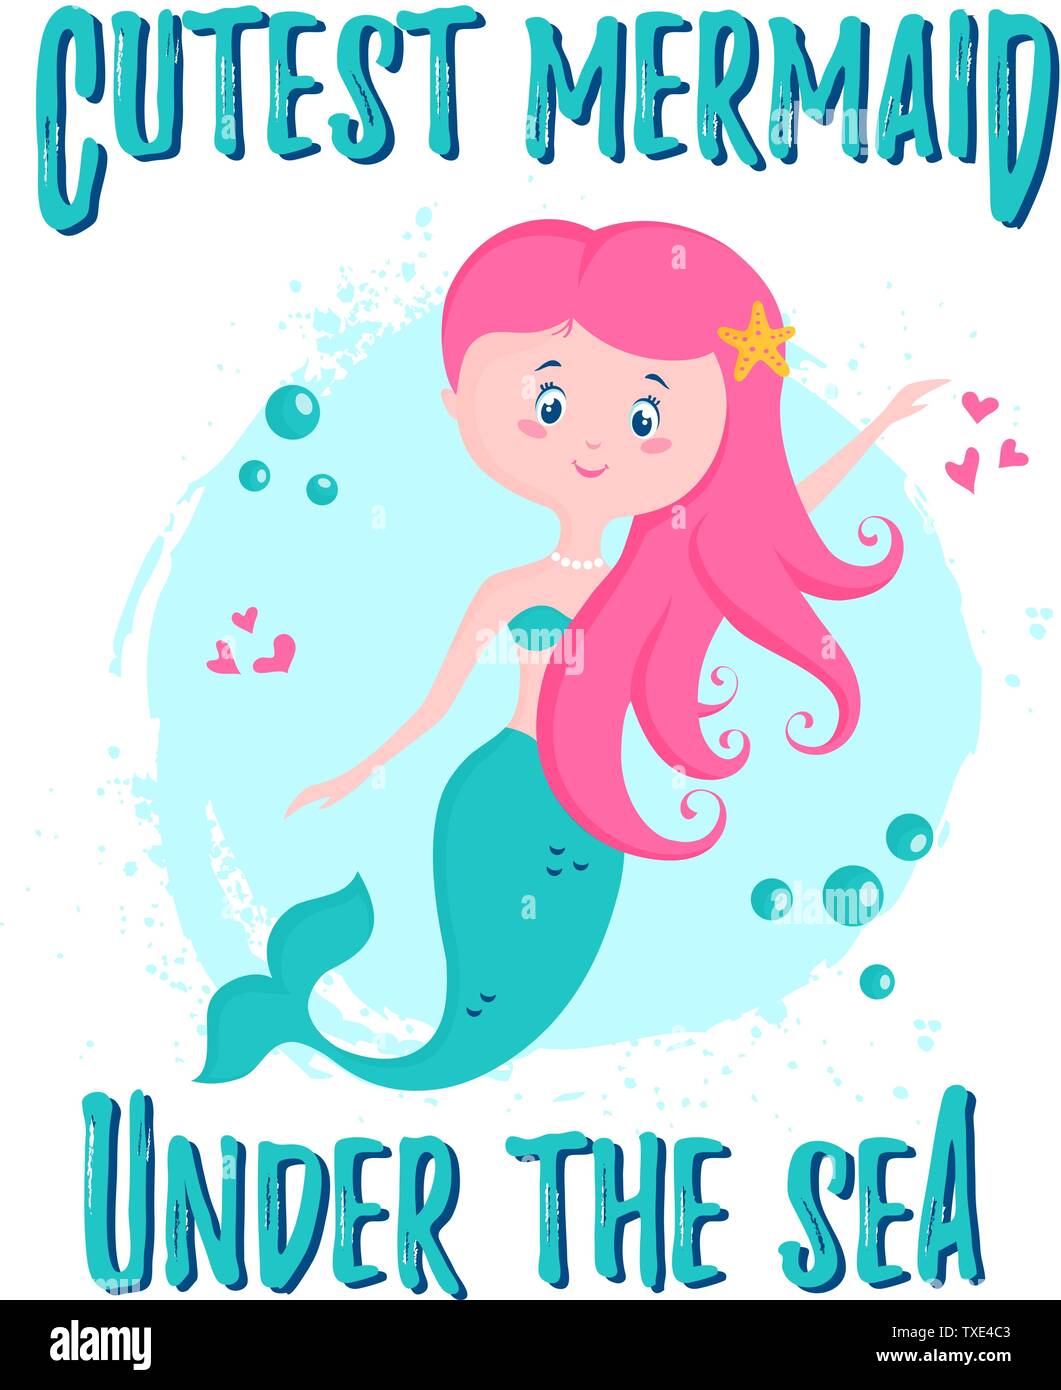 Vector illustration with cute mermaid and phrase - Cutest mermaid under the sea. Stylish design for invitation card, poster in the nursery or print fo Stock Vector